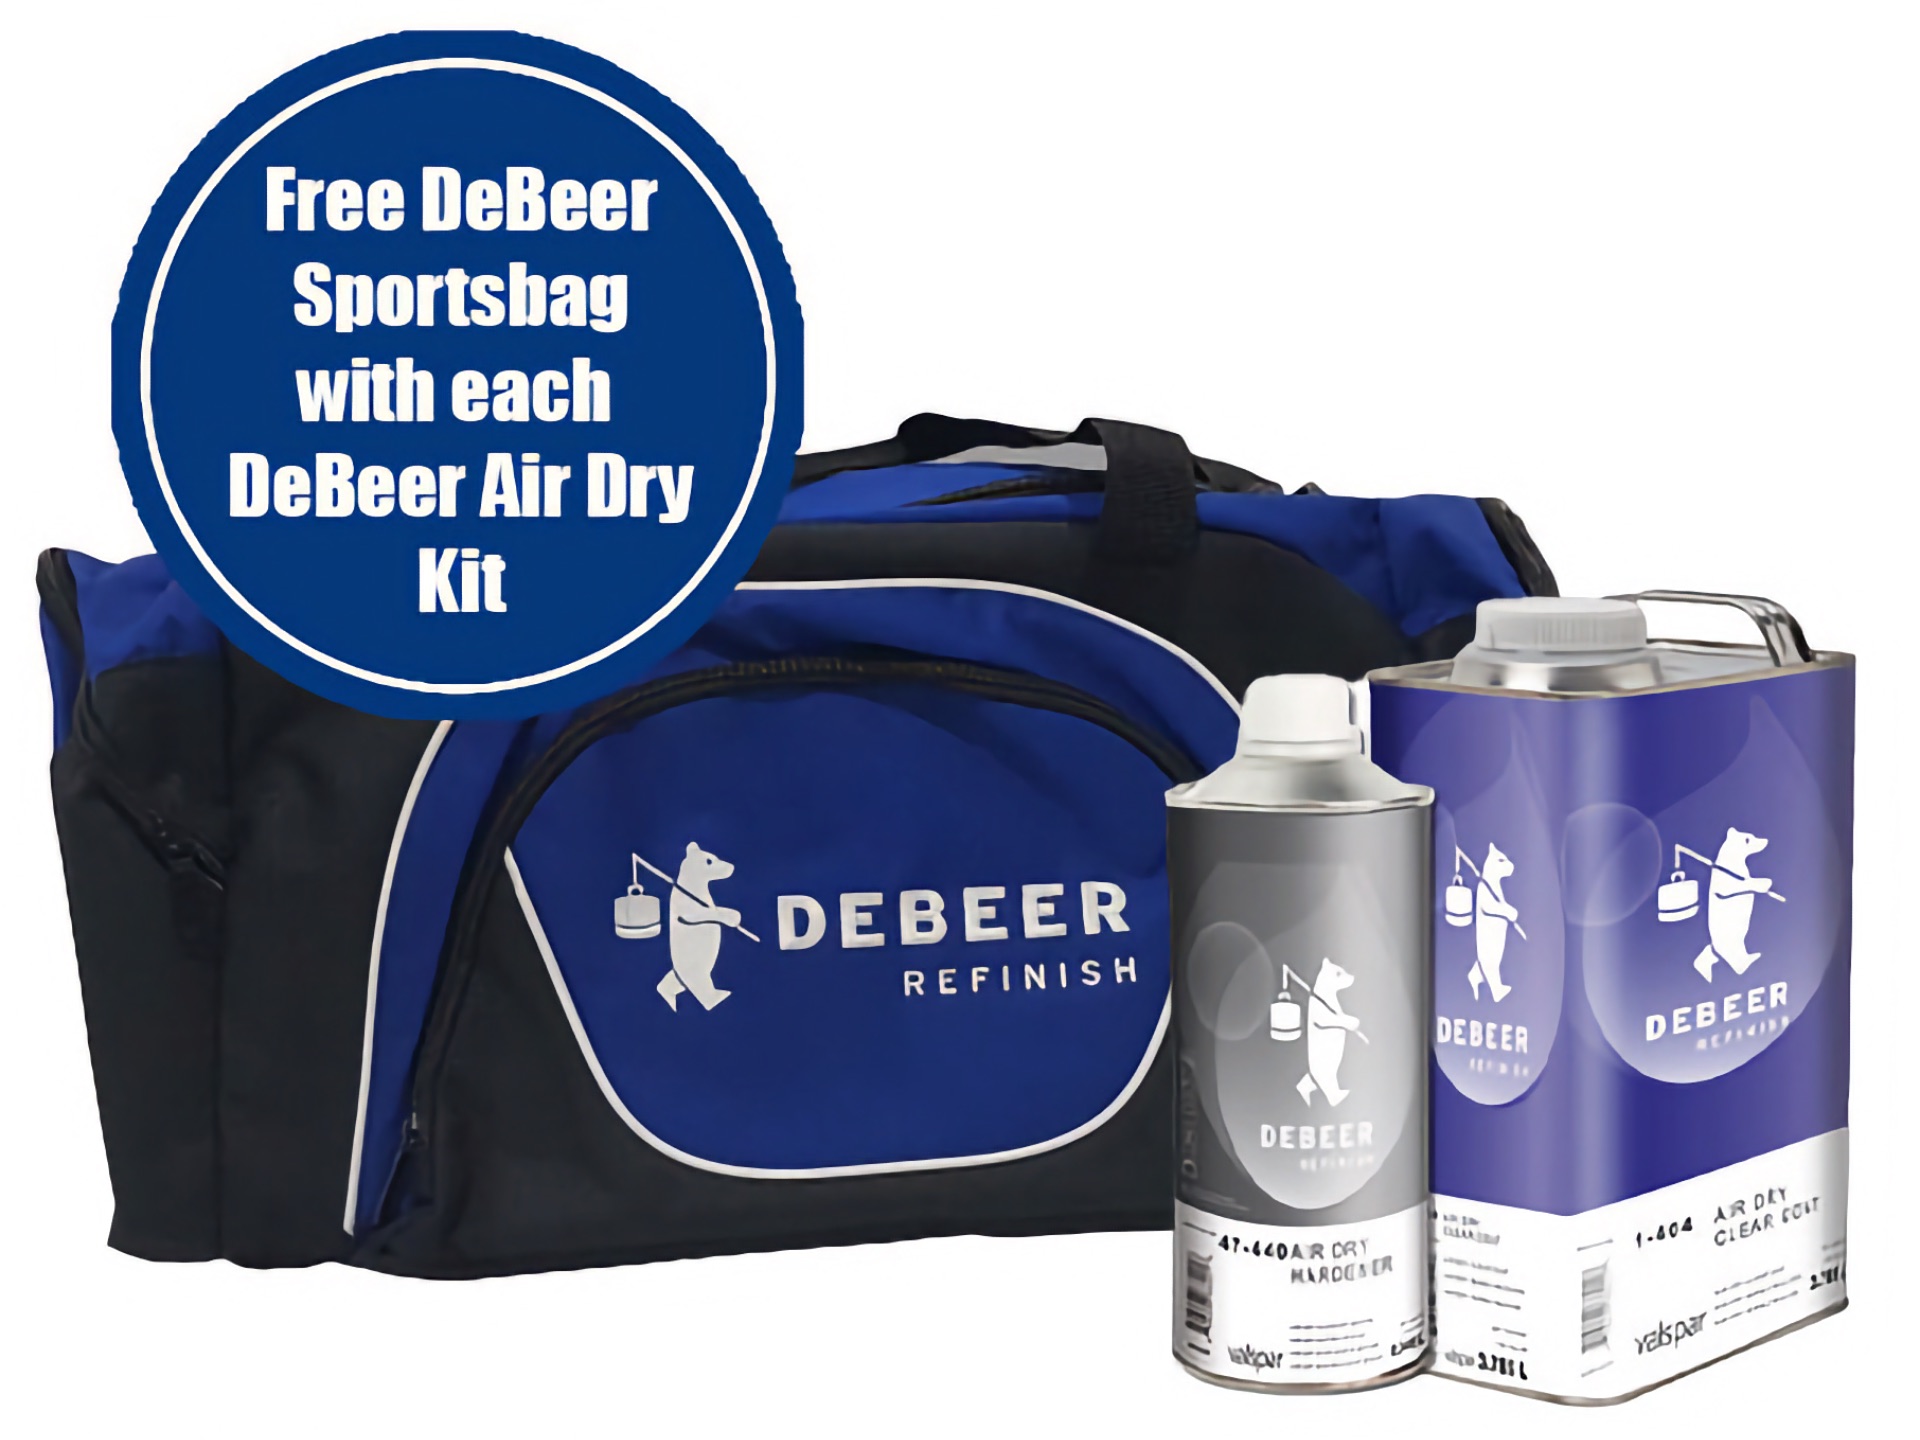 Autolac Offers Free Sports Bag In DeBeer Air Dry Kit Promotion